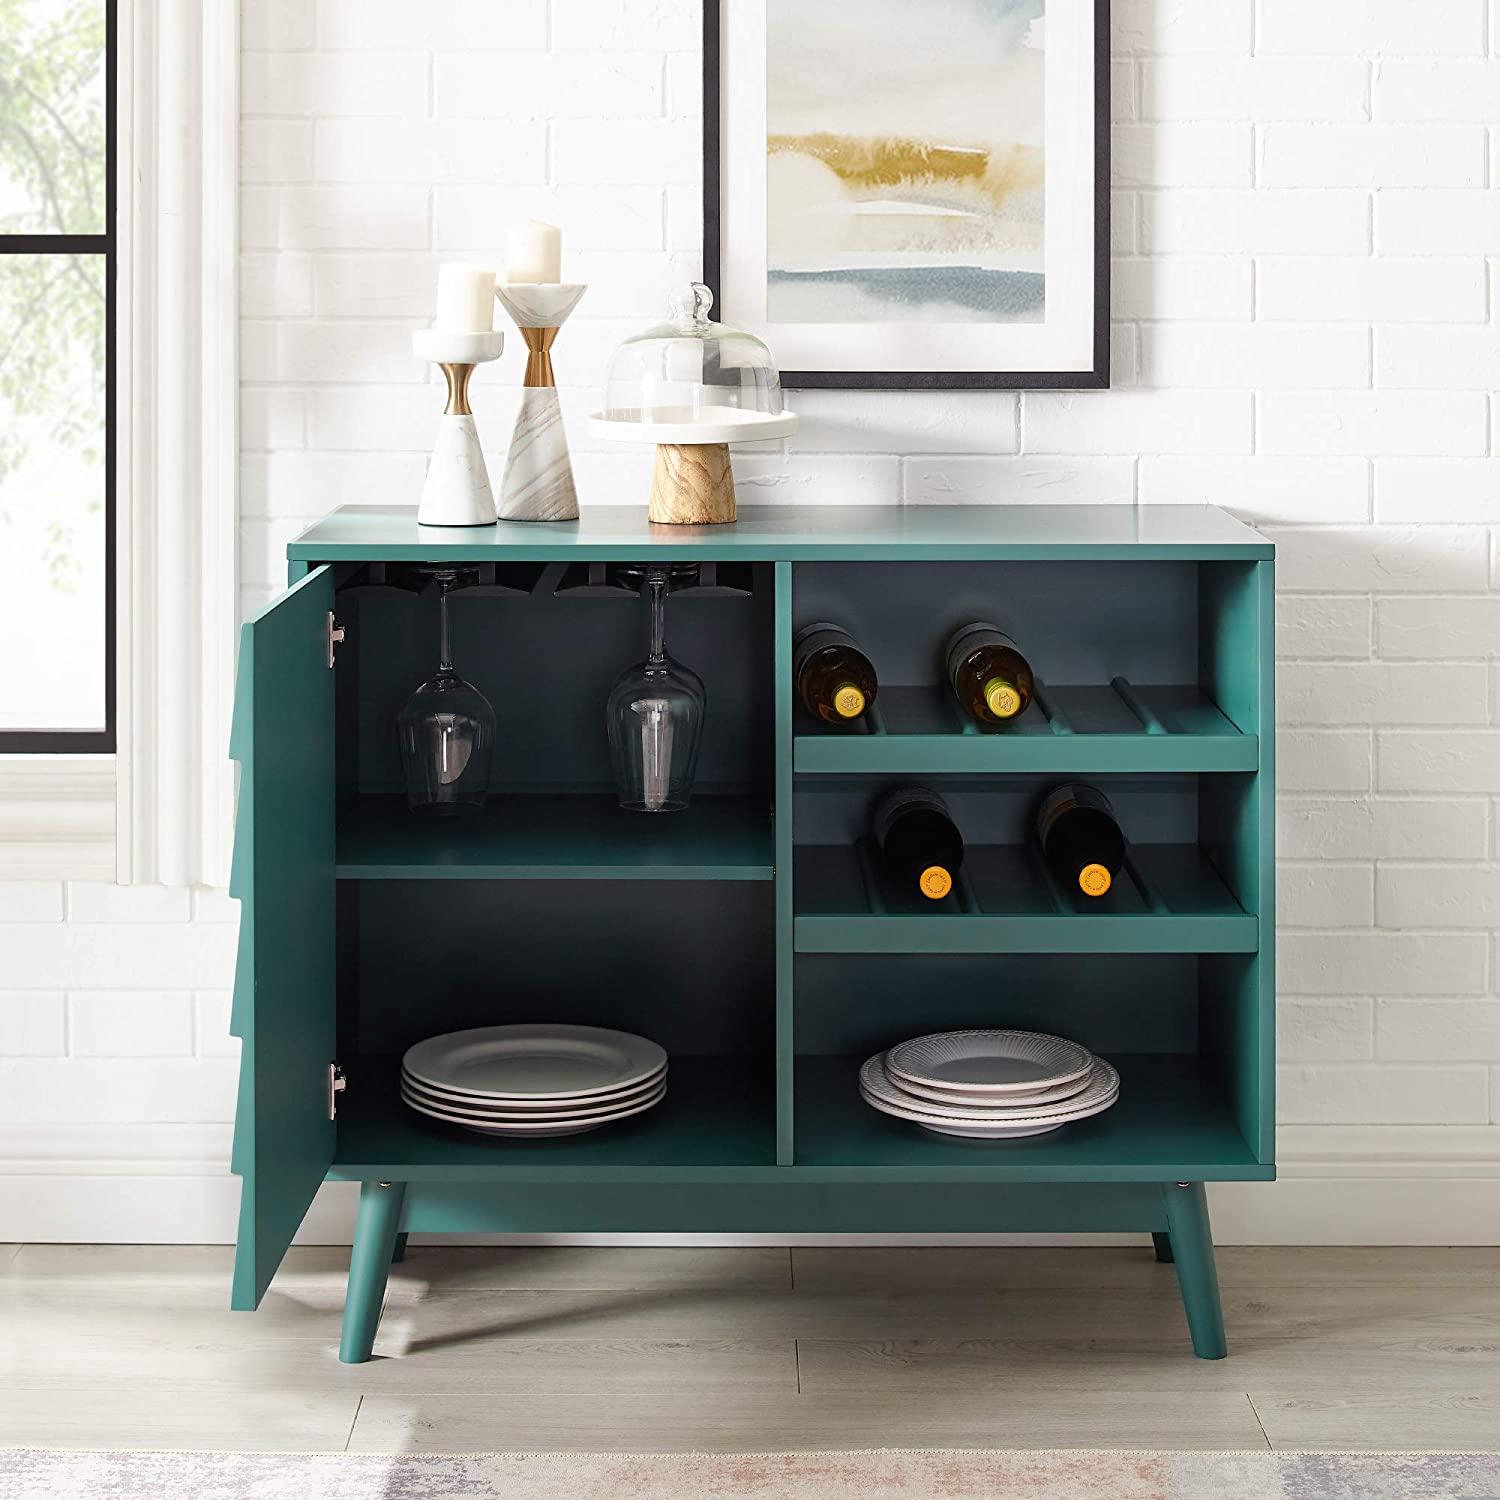 Mid-Century Modern Wood Kitchen Buffet Sideboard with Bottle Storage-Entryway Serving Wine Storage Doors-Dining Room Console Table